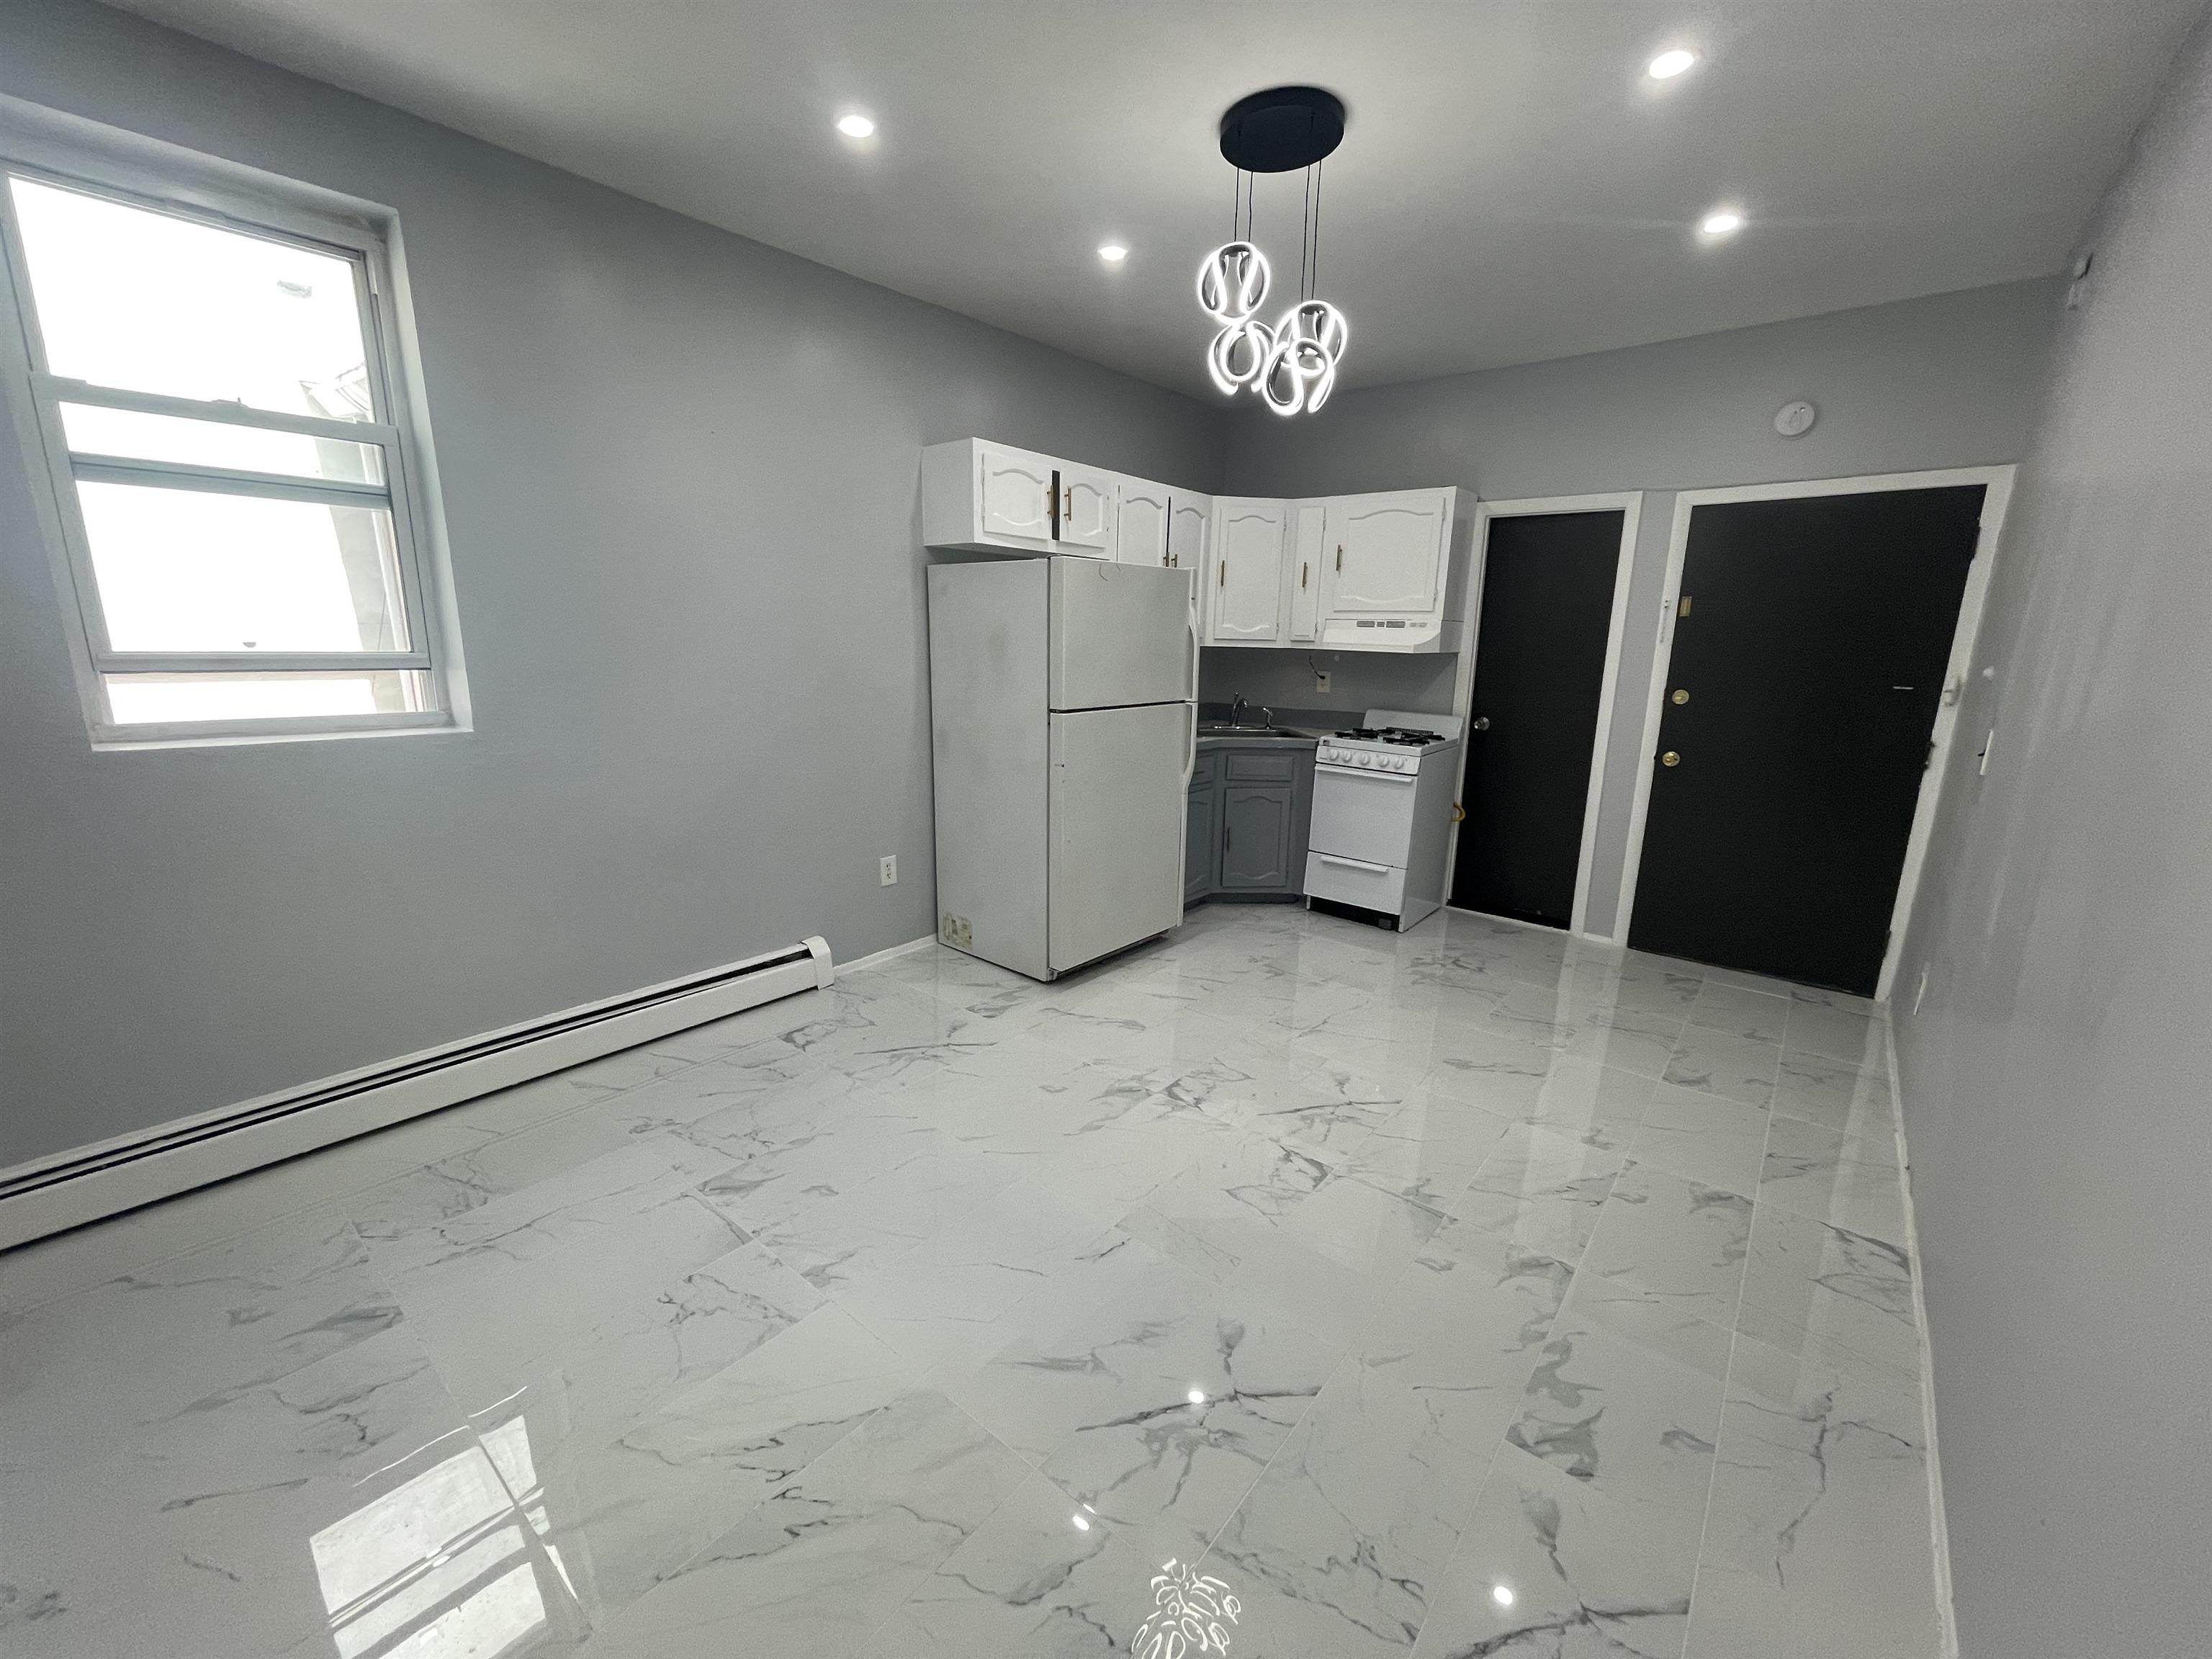 # 240009133 - For Rent in JERSEY CITY - Heights NJ